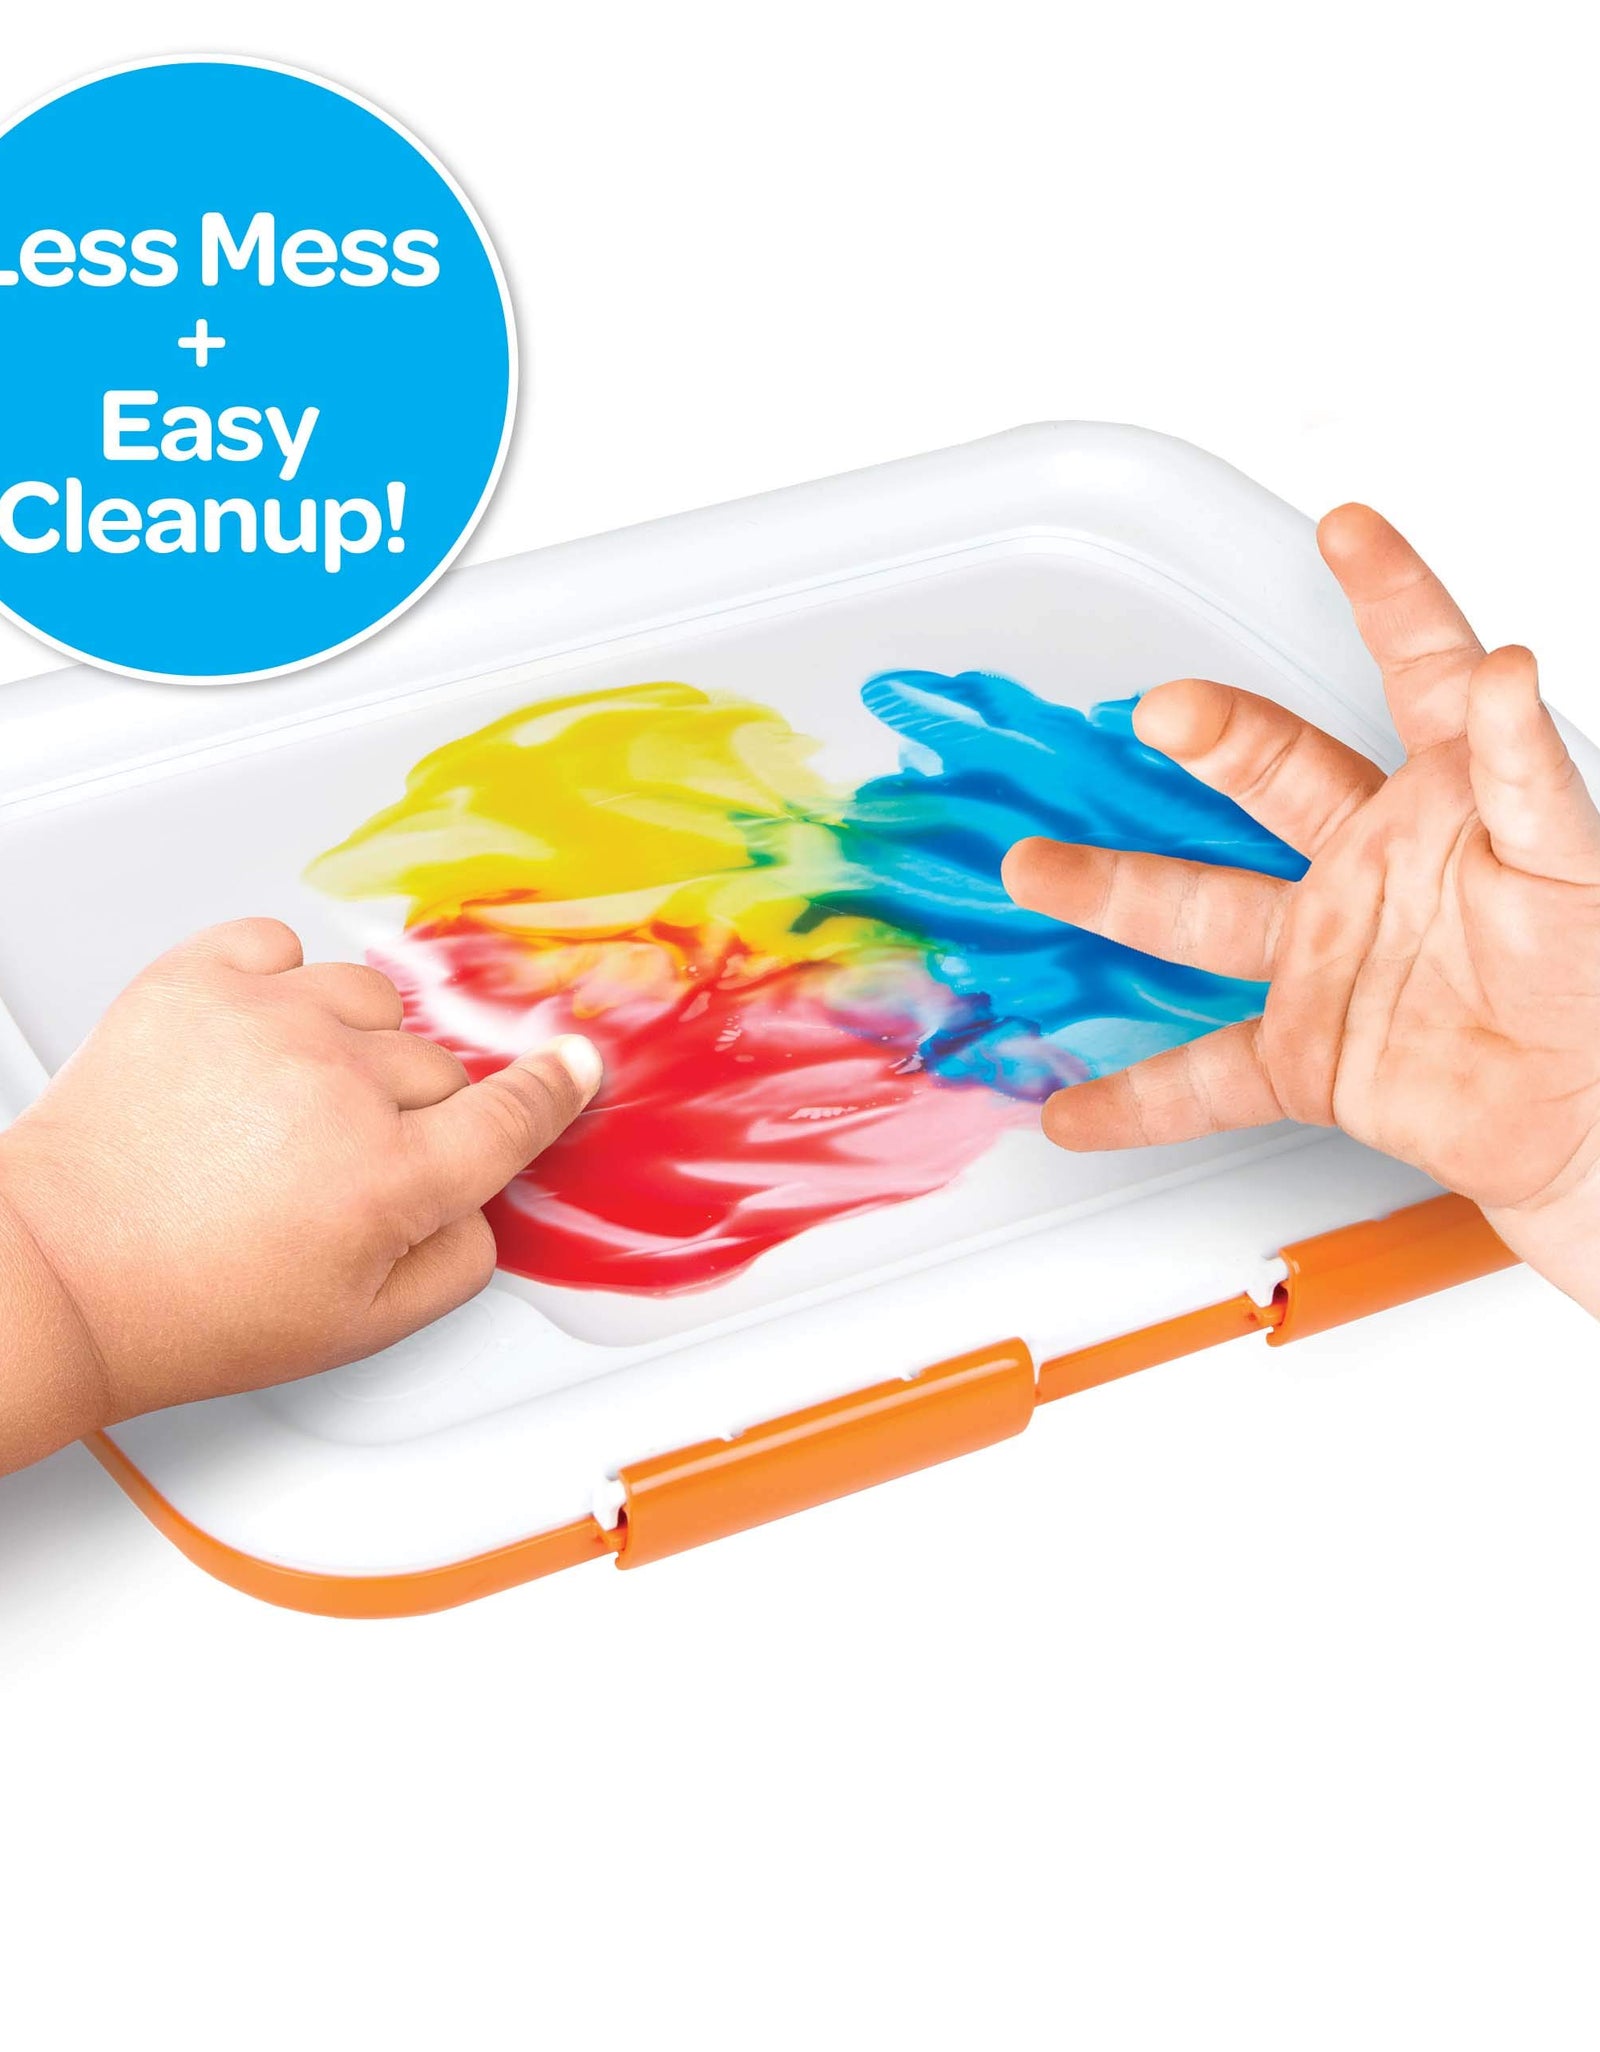 Crayola Washable Finger Paint Station, Less Mess Finger Paints for Toddlers, Kids Gift, 2 ounces